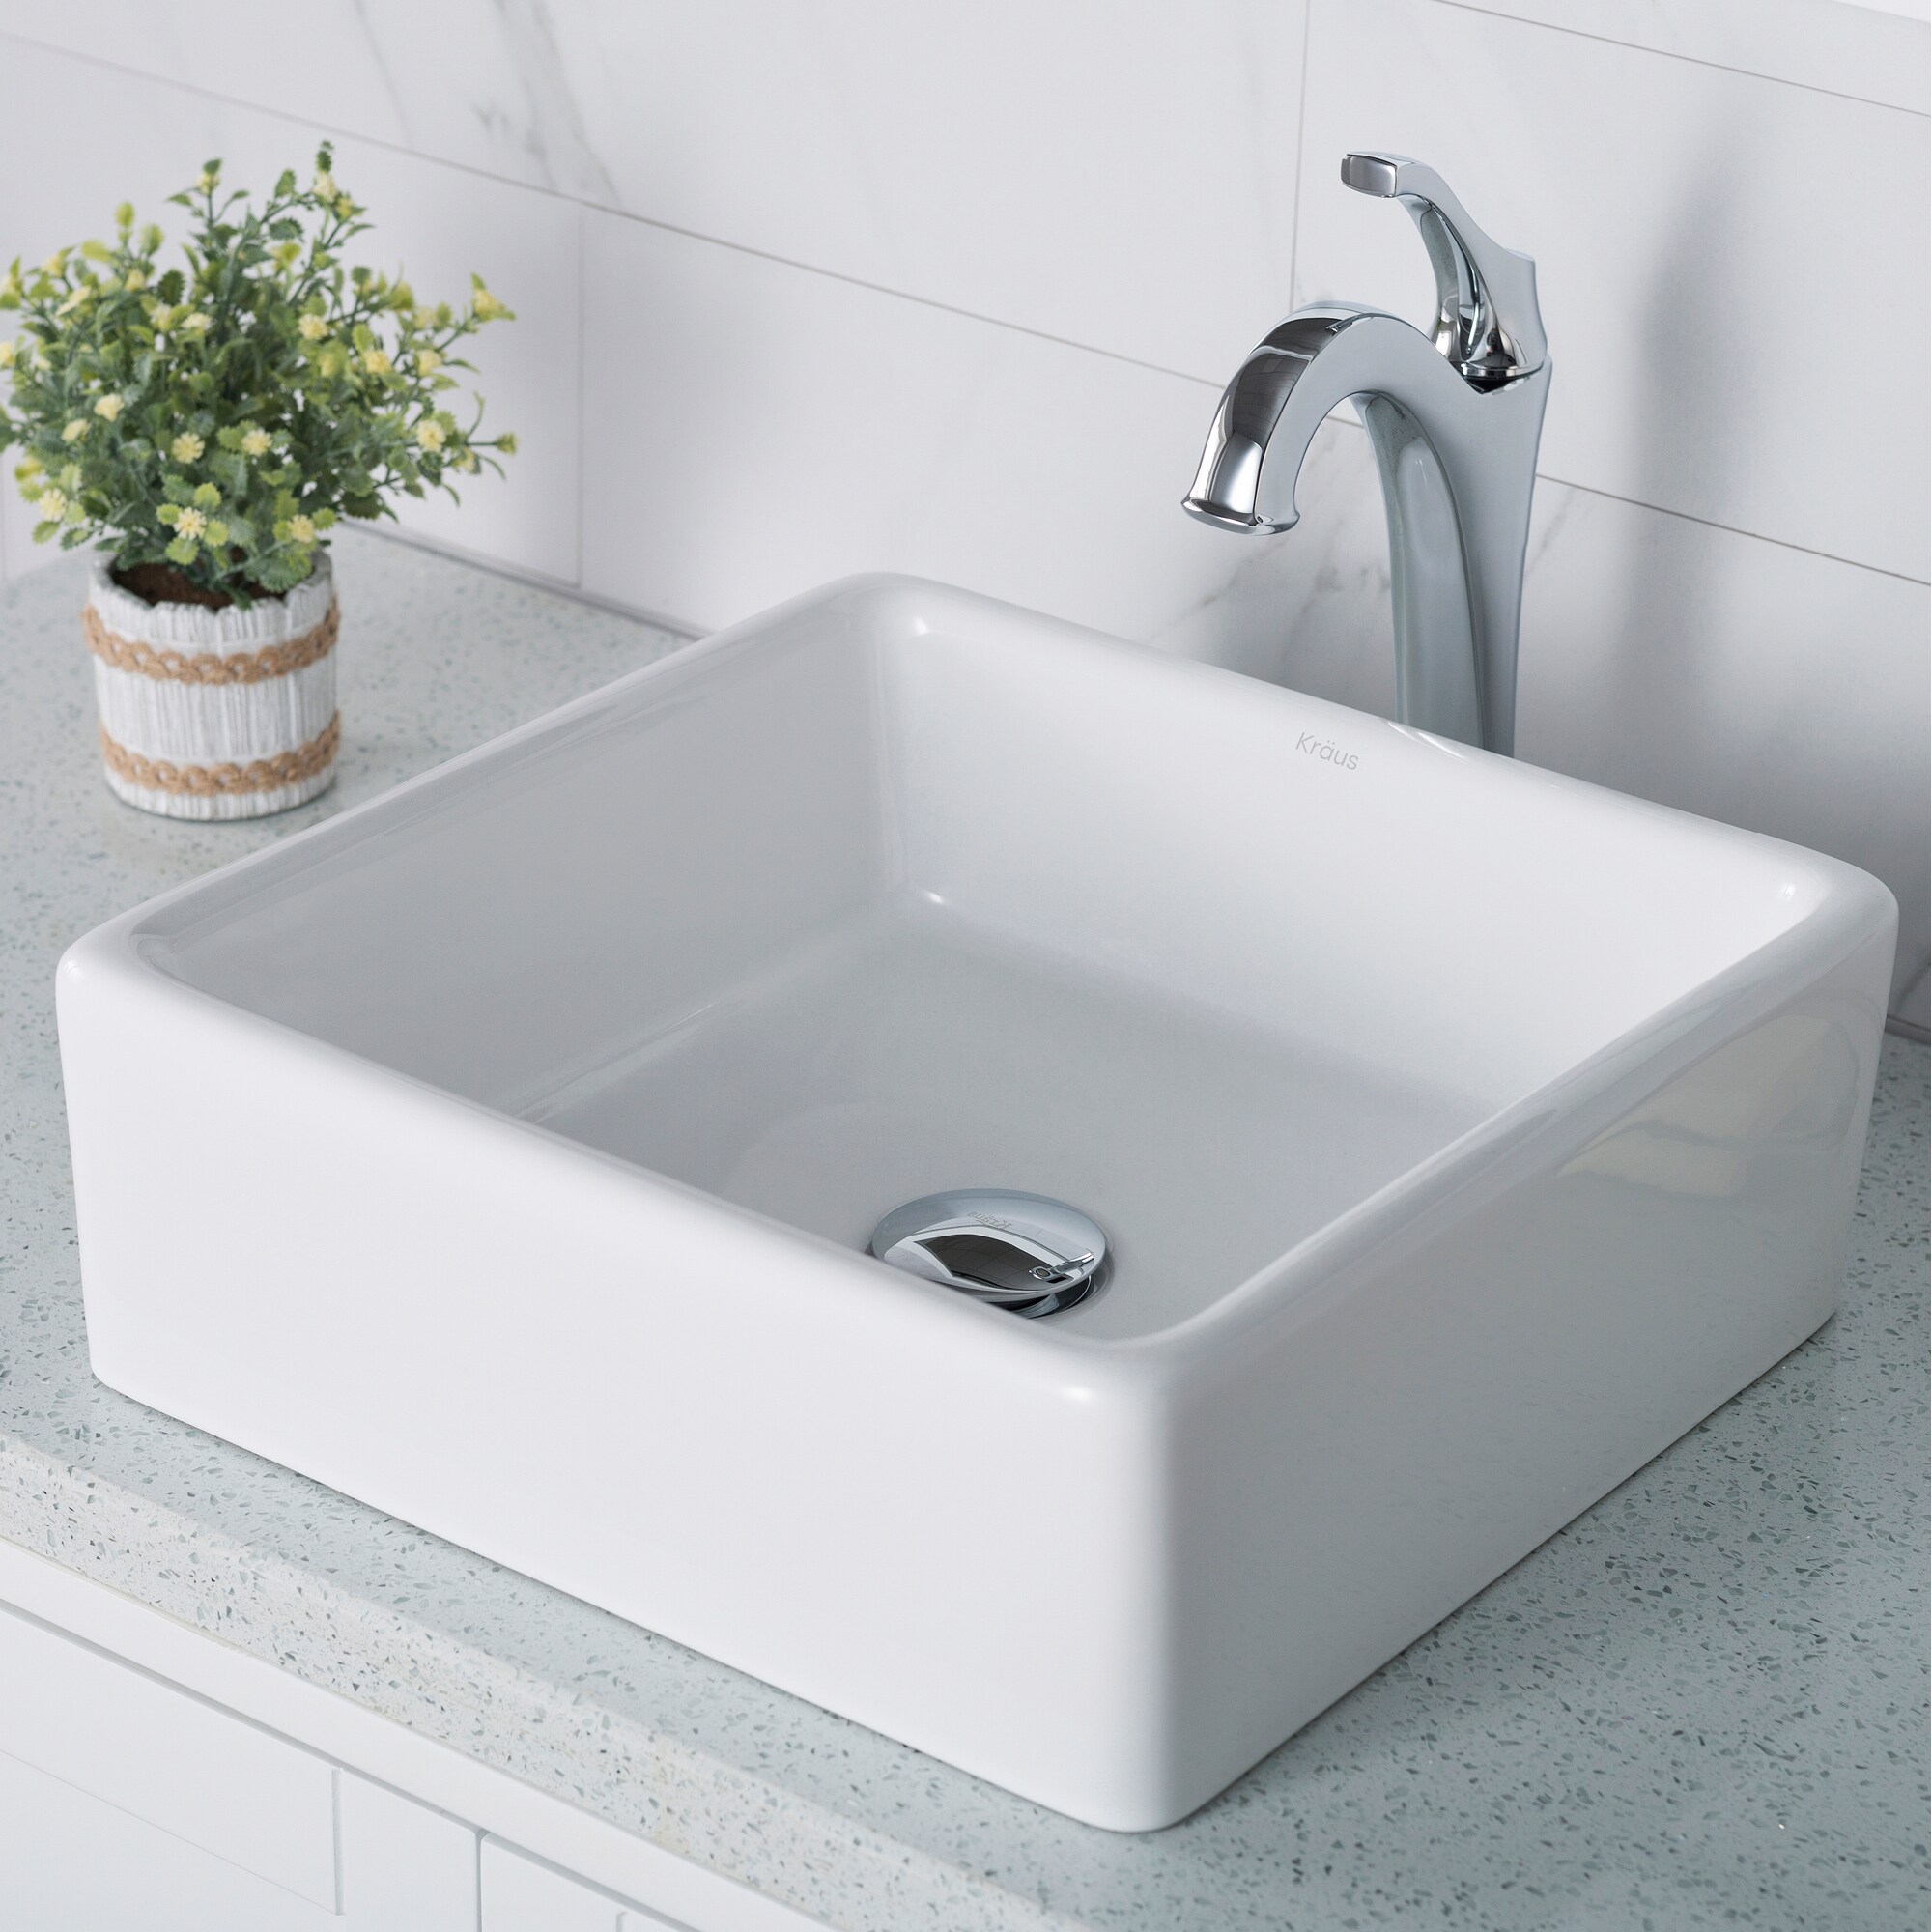 Kraus White Ceramic Vessel Square Traditional Bathroom Sink with Faucet ...